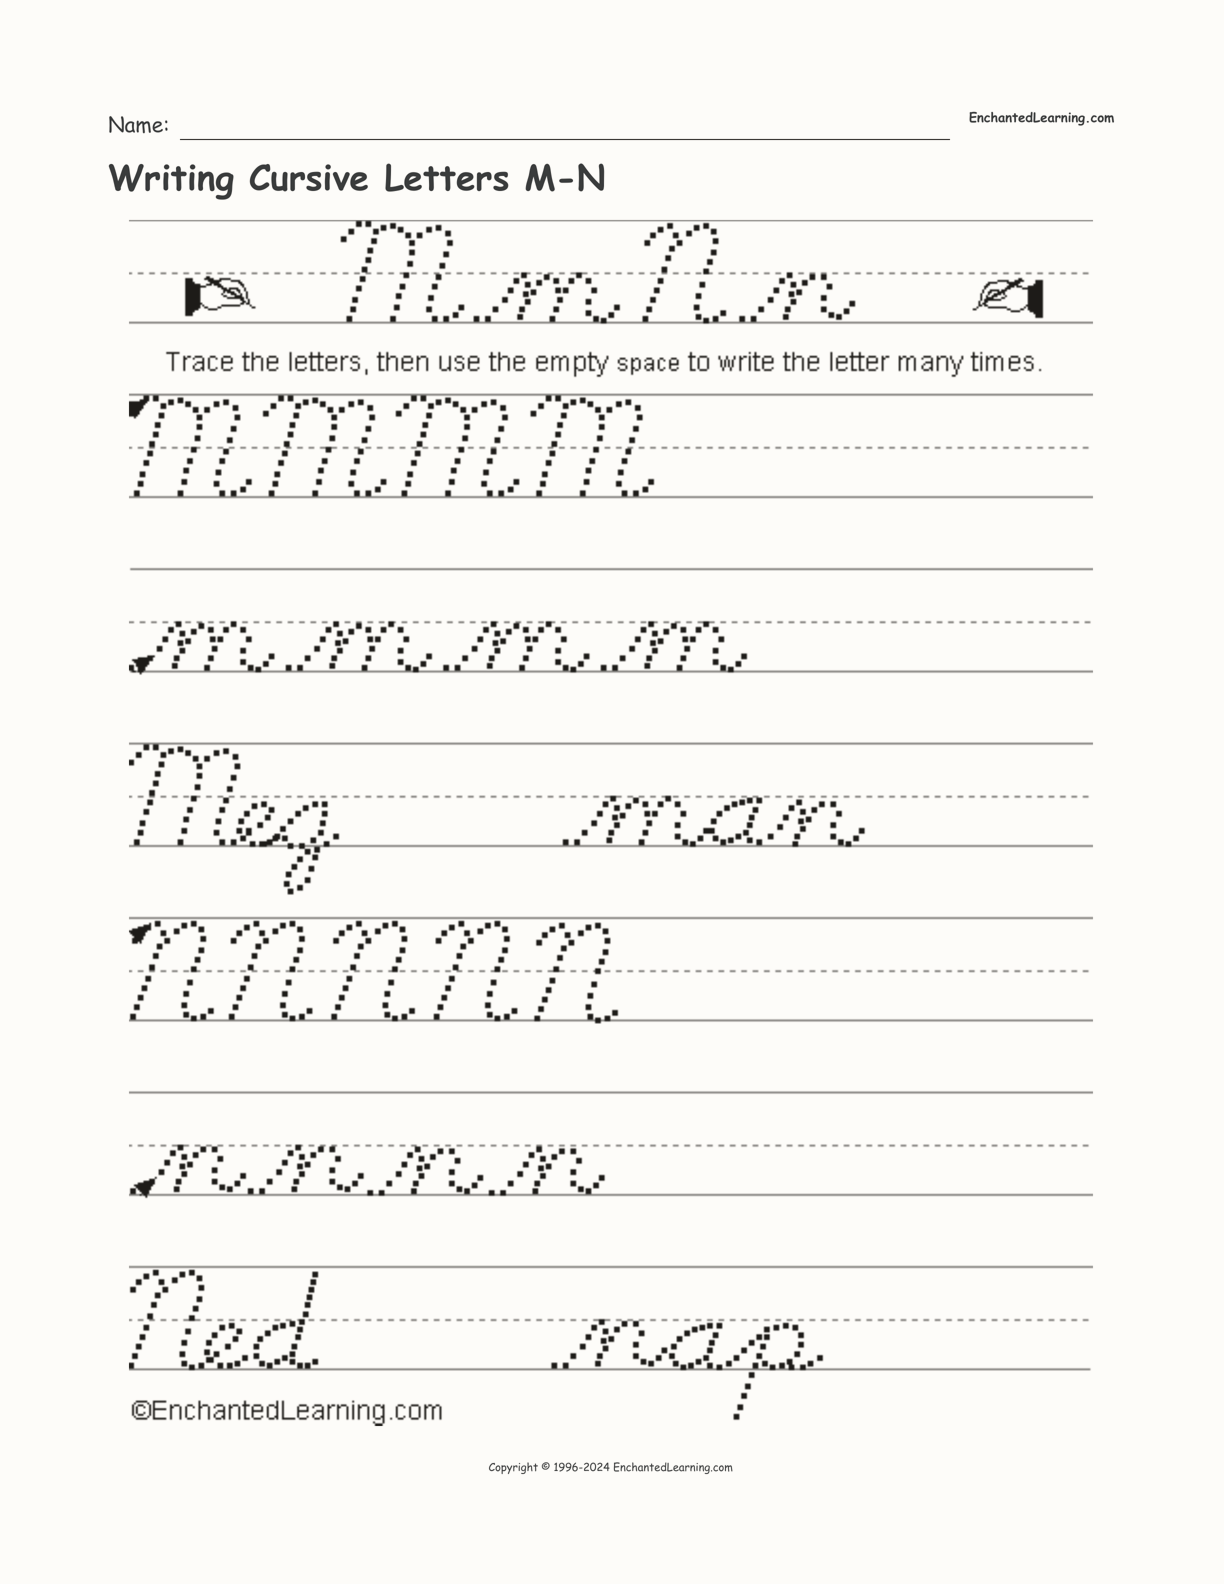 Writing Cursive Letters M-N interactive worksheet page 1